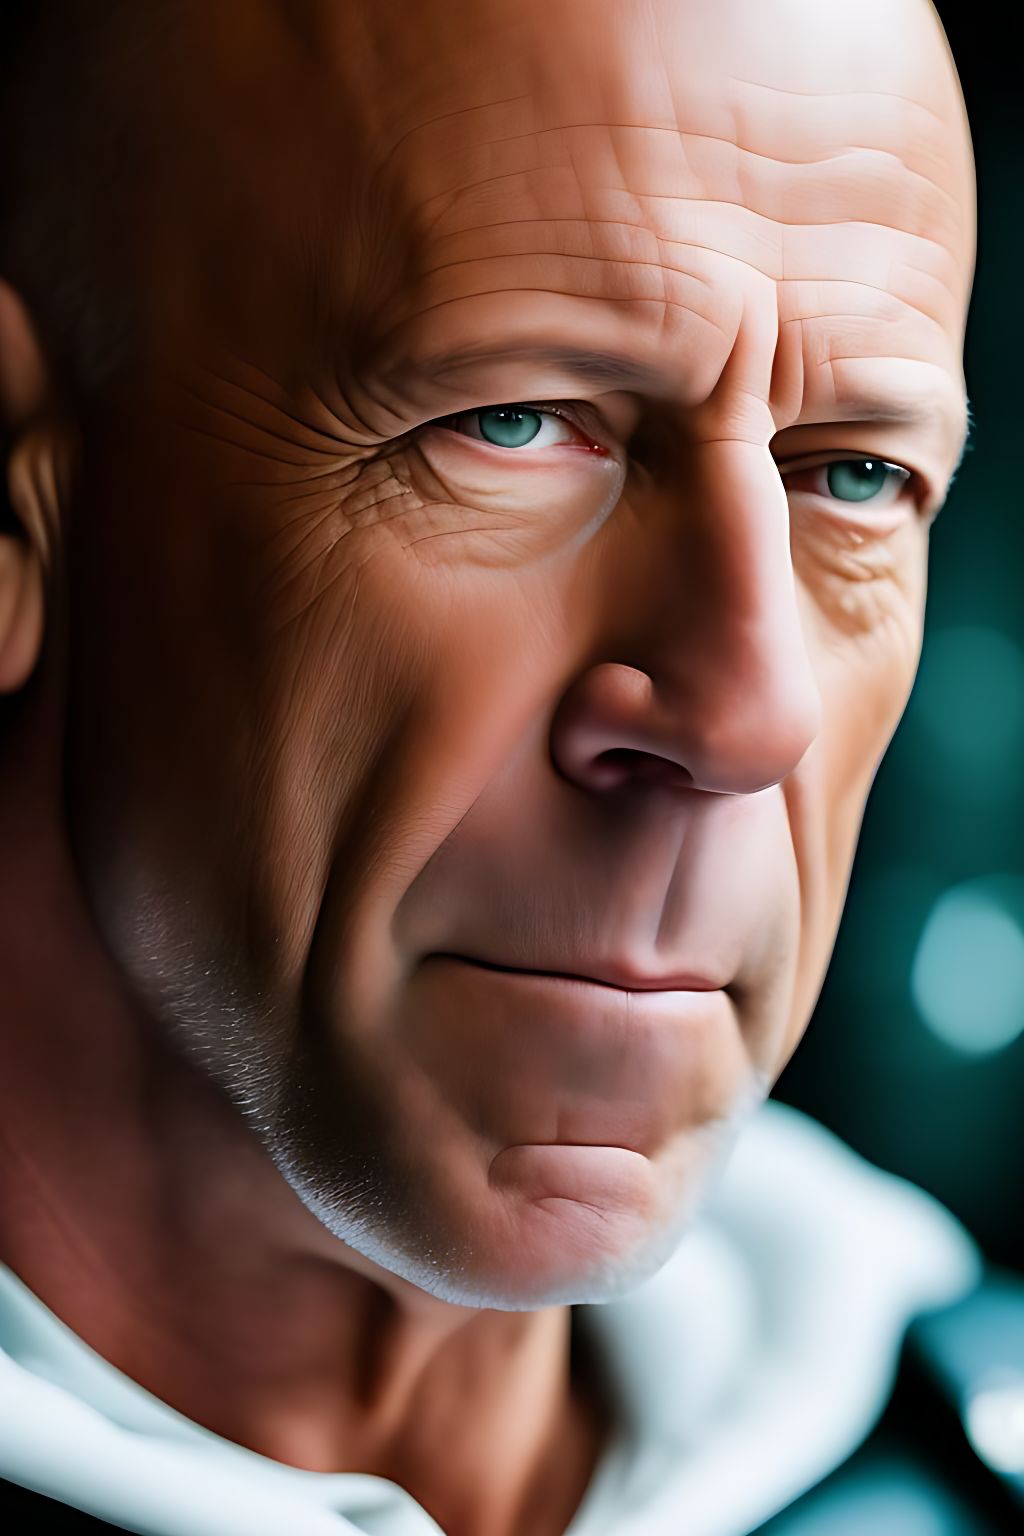 Gritty realistic portrait of Bruce Willis as a Marvel superhero ((wearing a superhero outfit from Marvel's MCU)),16mm film style with film grain, Alberto, Canon EOS R6, Prime lens photography, Perfectly balanced dim lighting , Real human skin, White balance, Sharp details, Alberto, Canon EOS R6, Prime lens photography, Perfectly balanced dim lighting , Real human skin, White balance, Sharp details